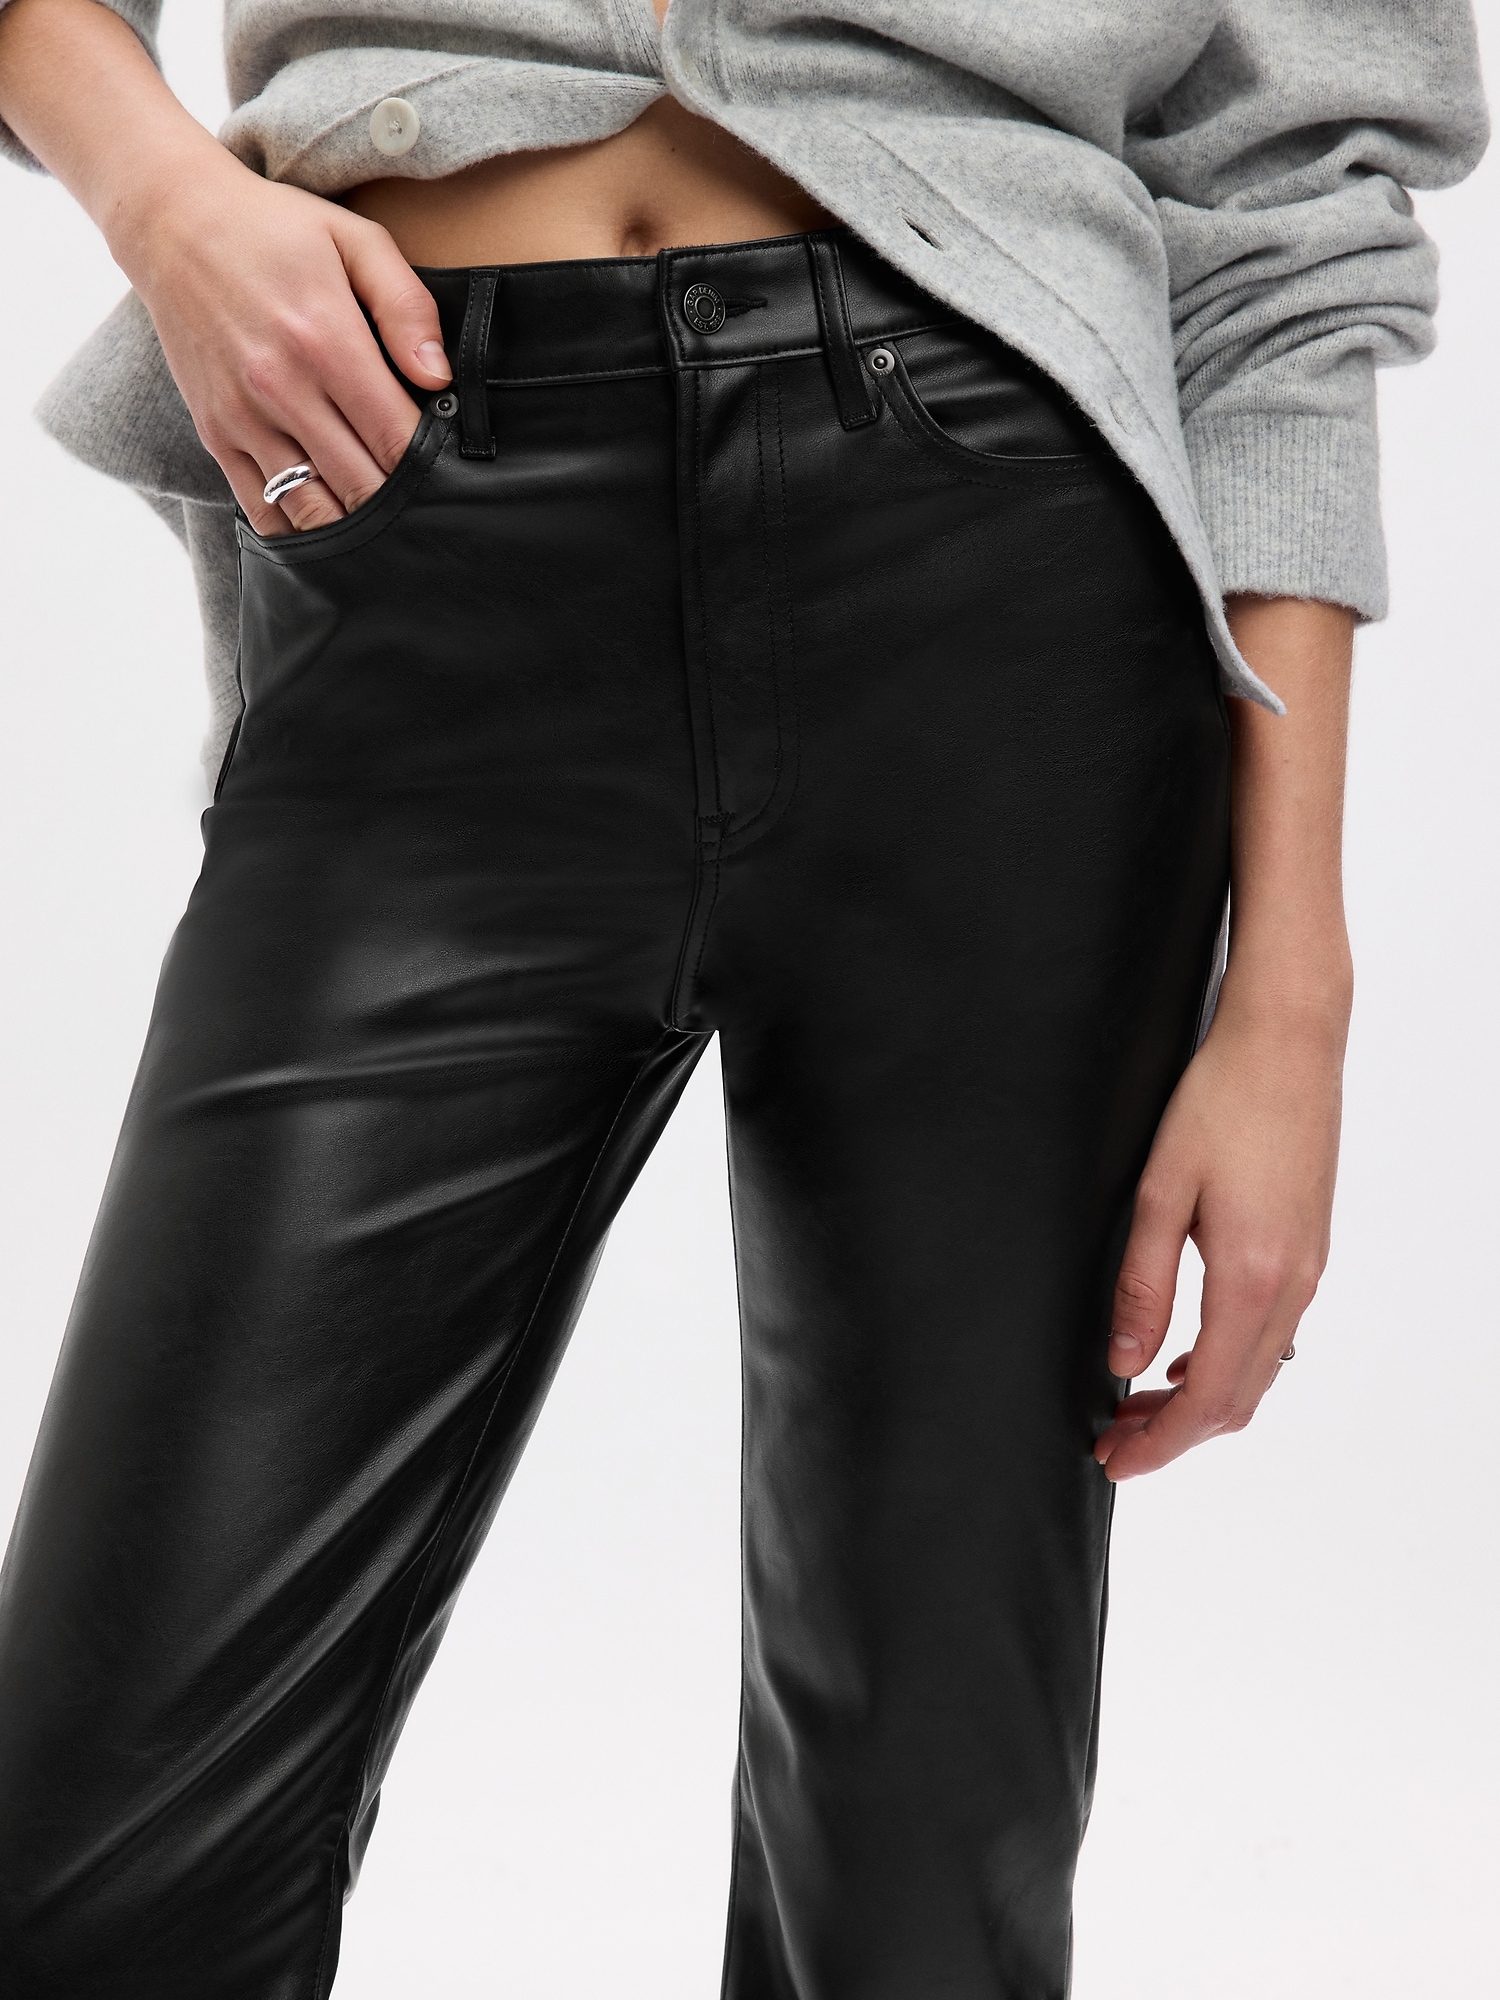 Vegan Leather Pants Women, Faux Leather Pants Women, Leather Bell Bottoms  Trousers, Beige Leather Pants for Women, Leather Flares -  Canada